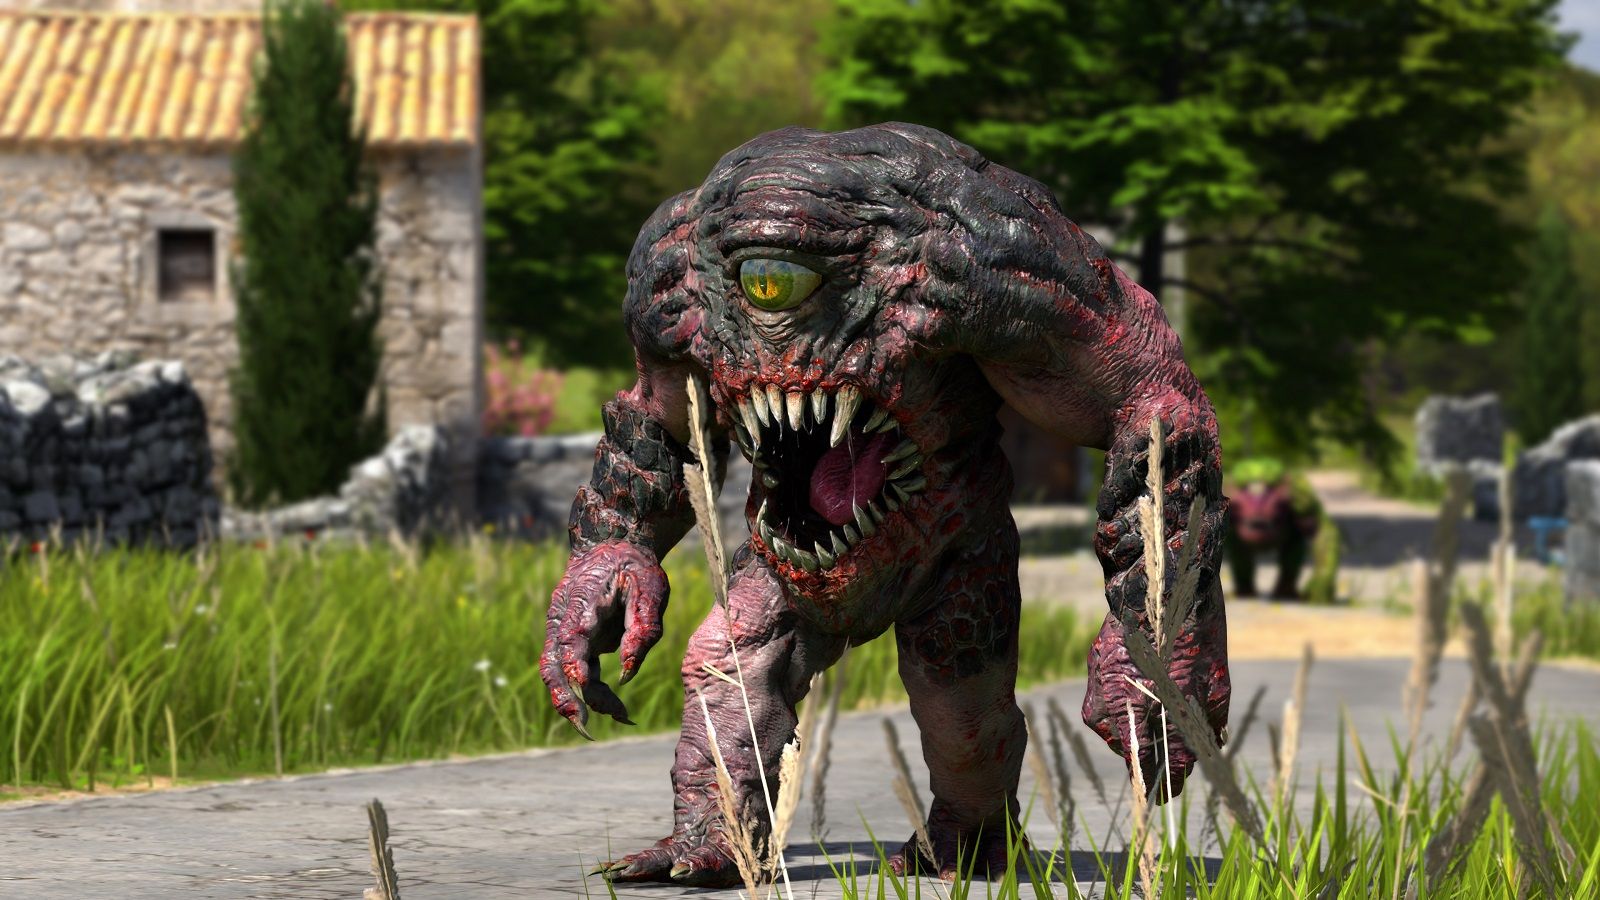 Serious Sam 4 will be released for PC in summer